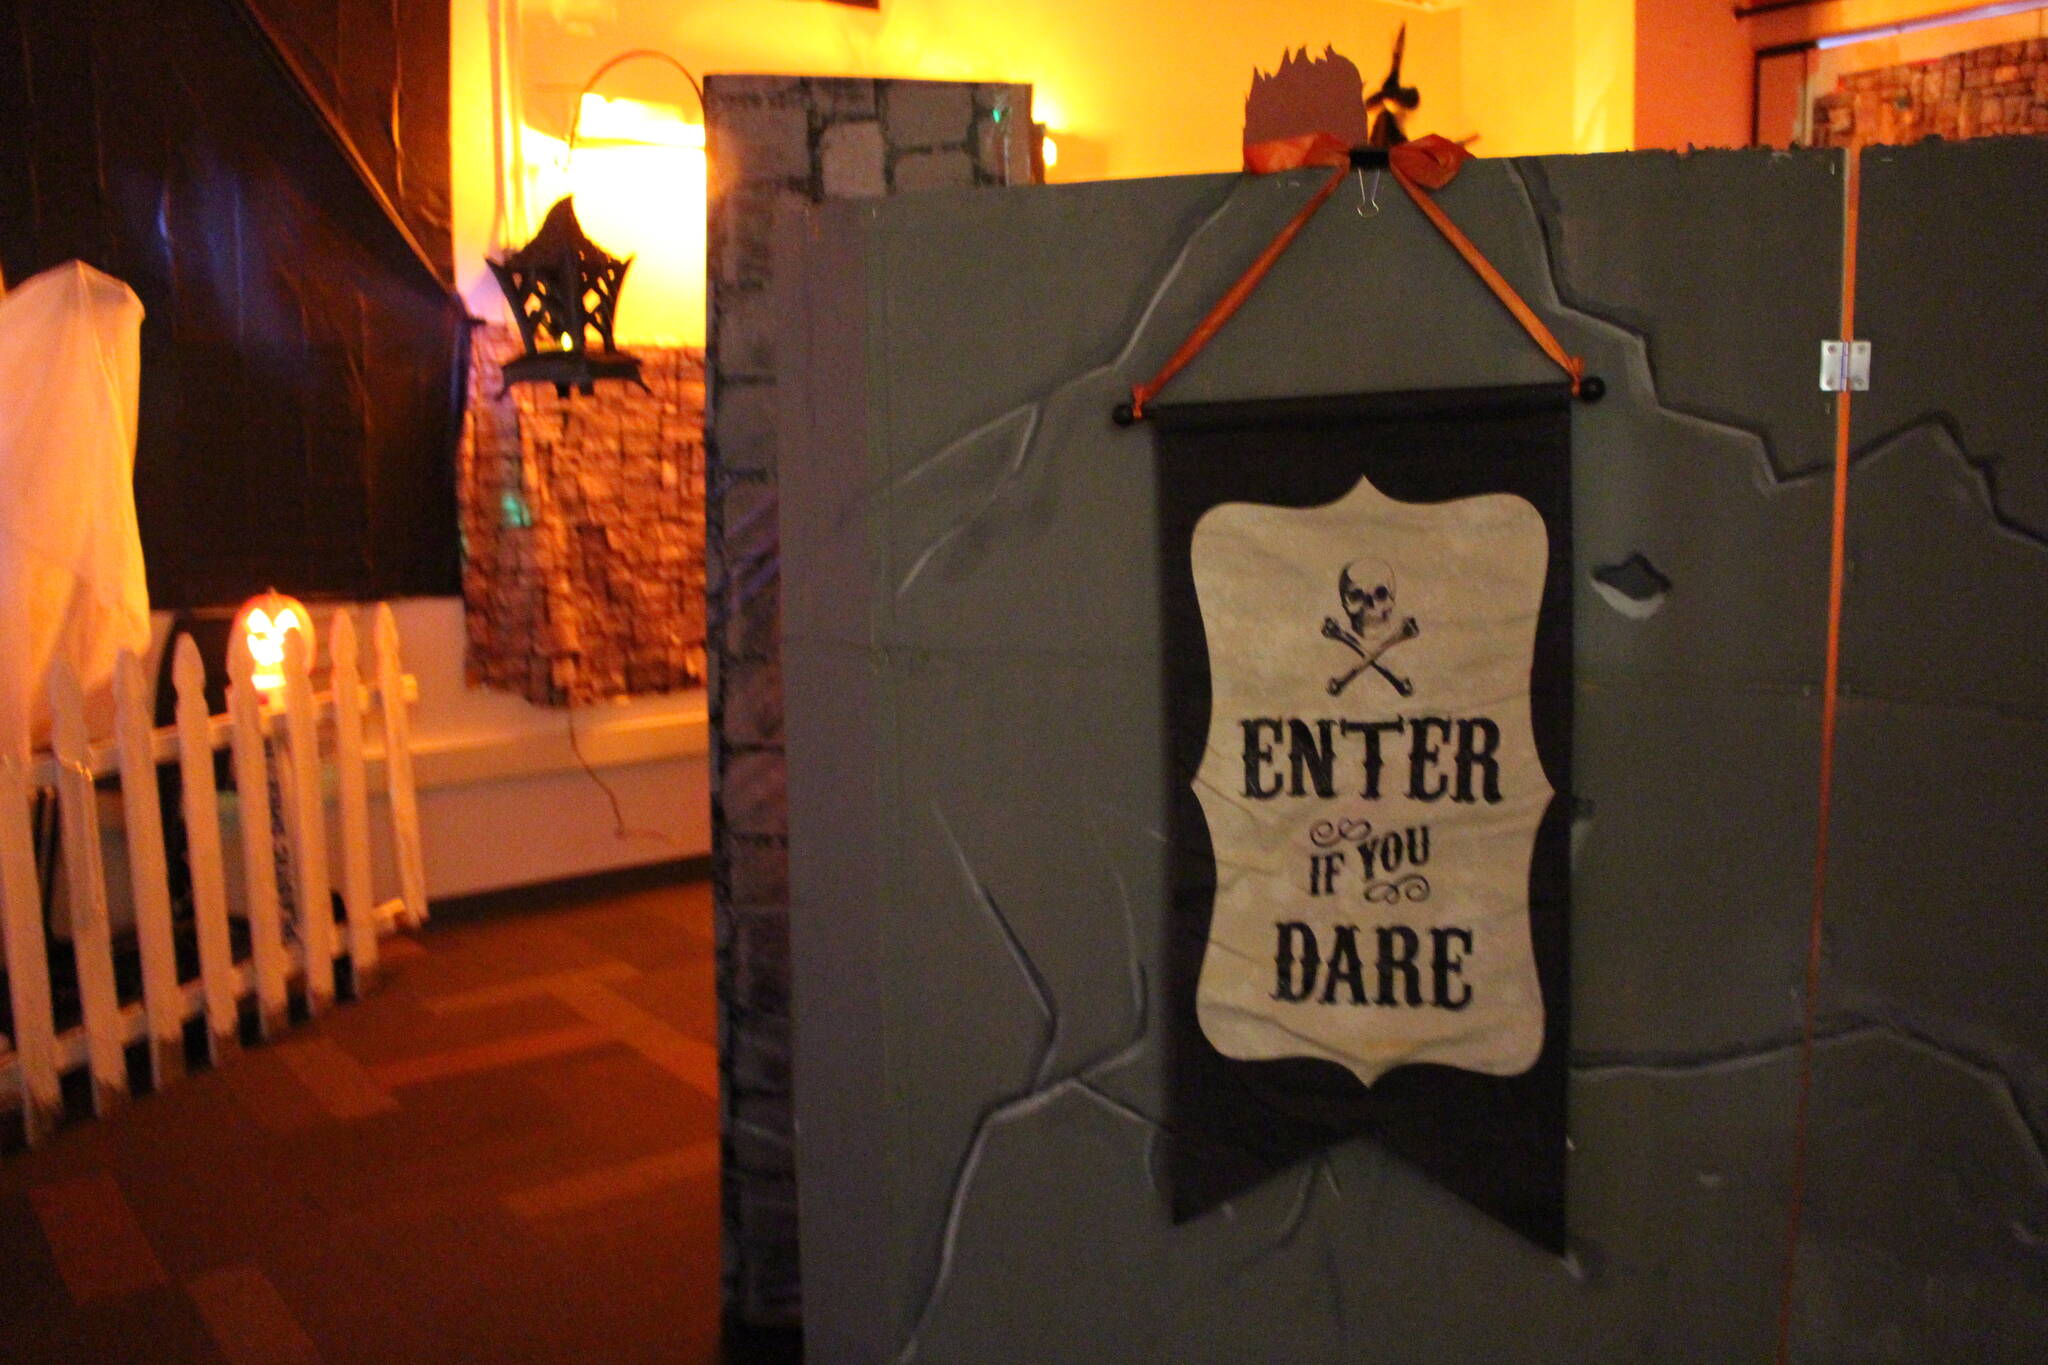 A sign welcoming visitors to the Literary Haunted House at the Kenai Community Library can be seen here on Oct. 30, 2019. (Photo by Brian Mazurek/Peninsula Clarion)
A sign welcoming visitors to the Literary Haunted House at the Kenai Community Library can be seen here on Oct. 30, 2019. (Photo by Brian Mazurek/Peninsula Clarion file)